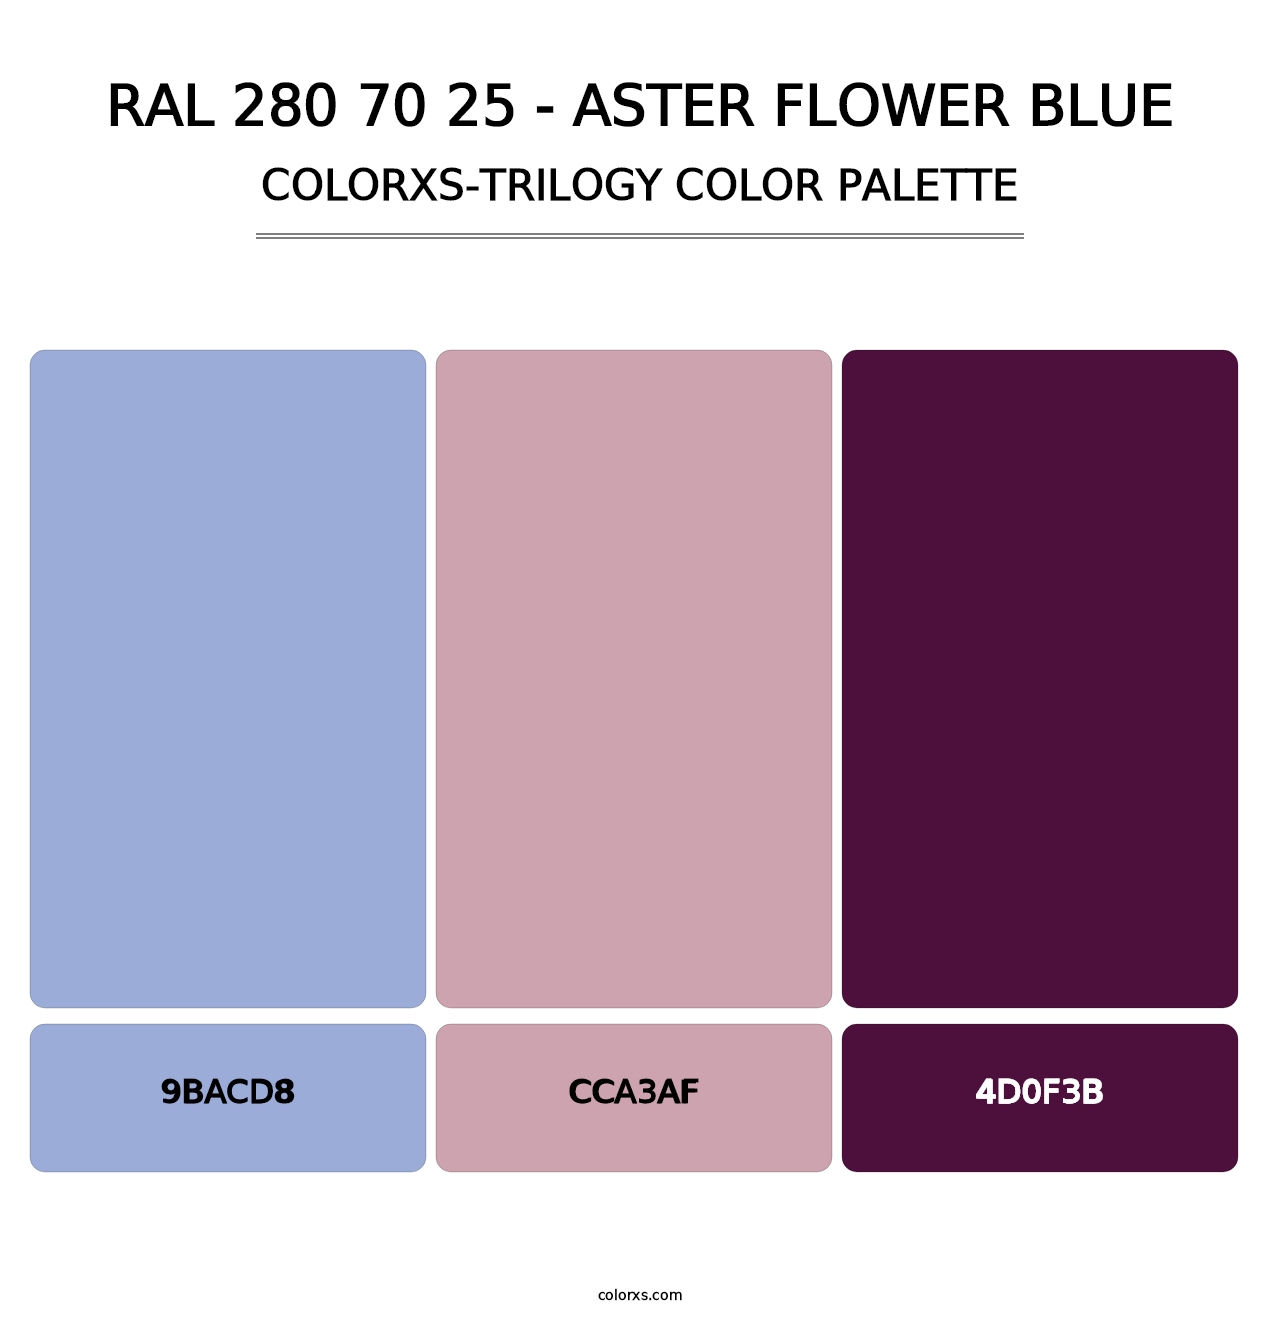 RAL 280 70 25 - Aster Flower Blue - Colorxs Trilogy Palette